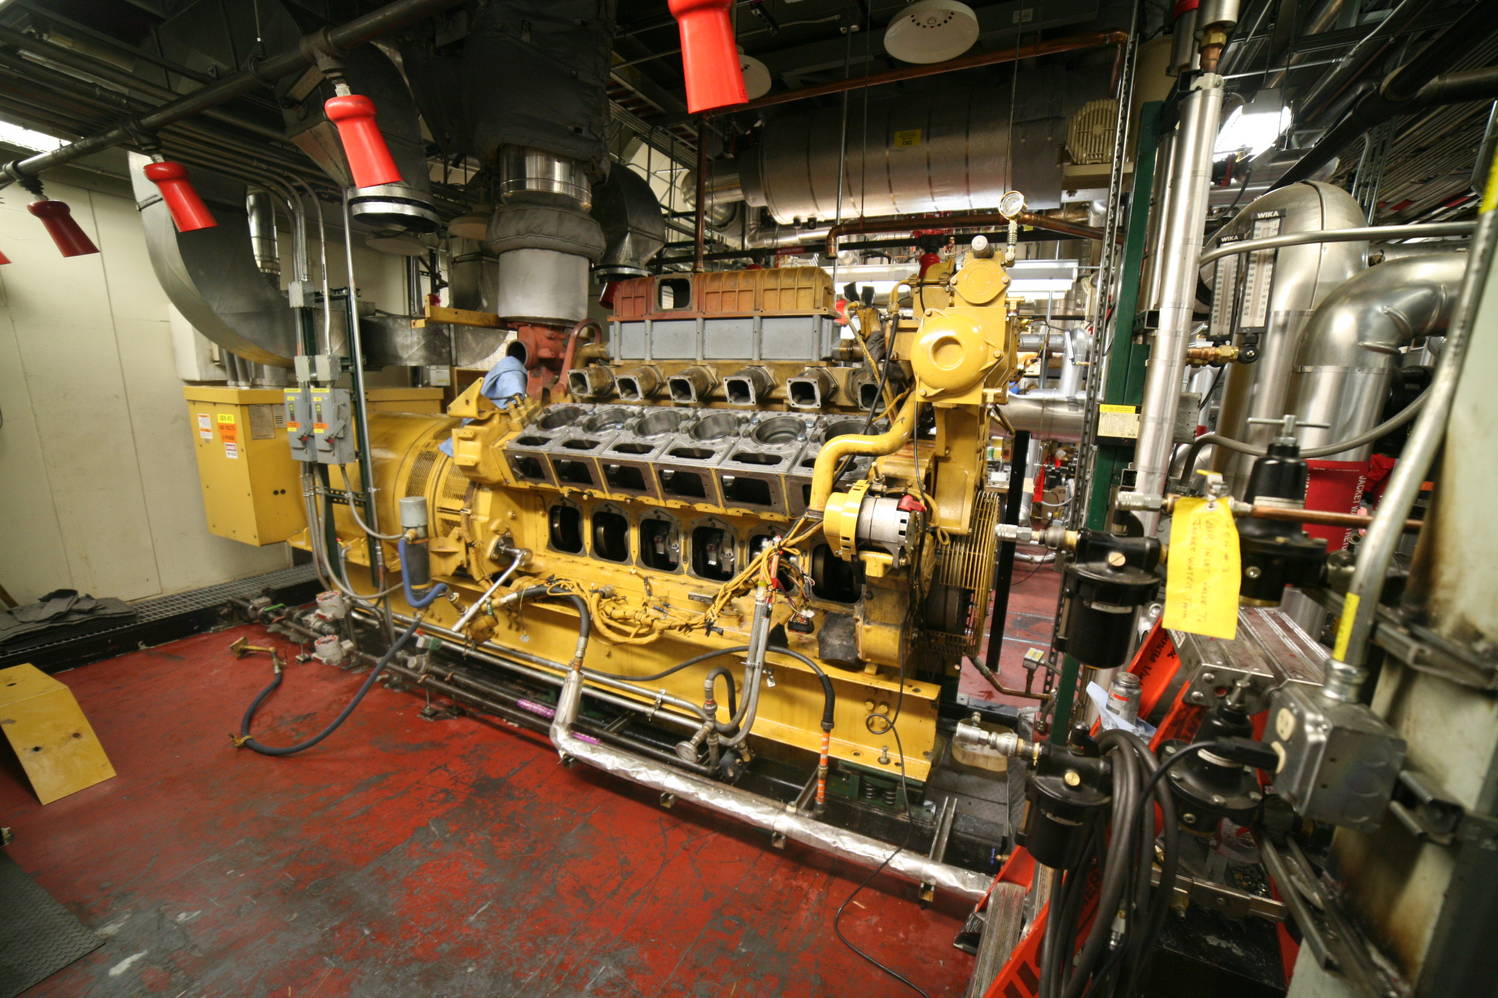 A power generator partially opened up during maintenance